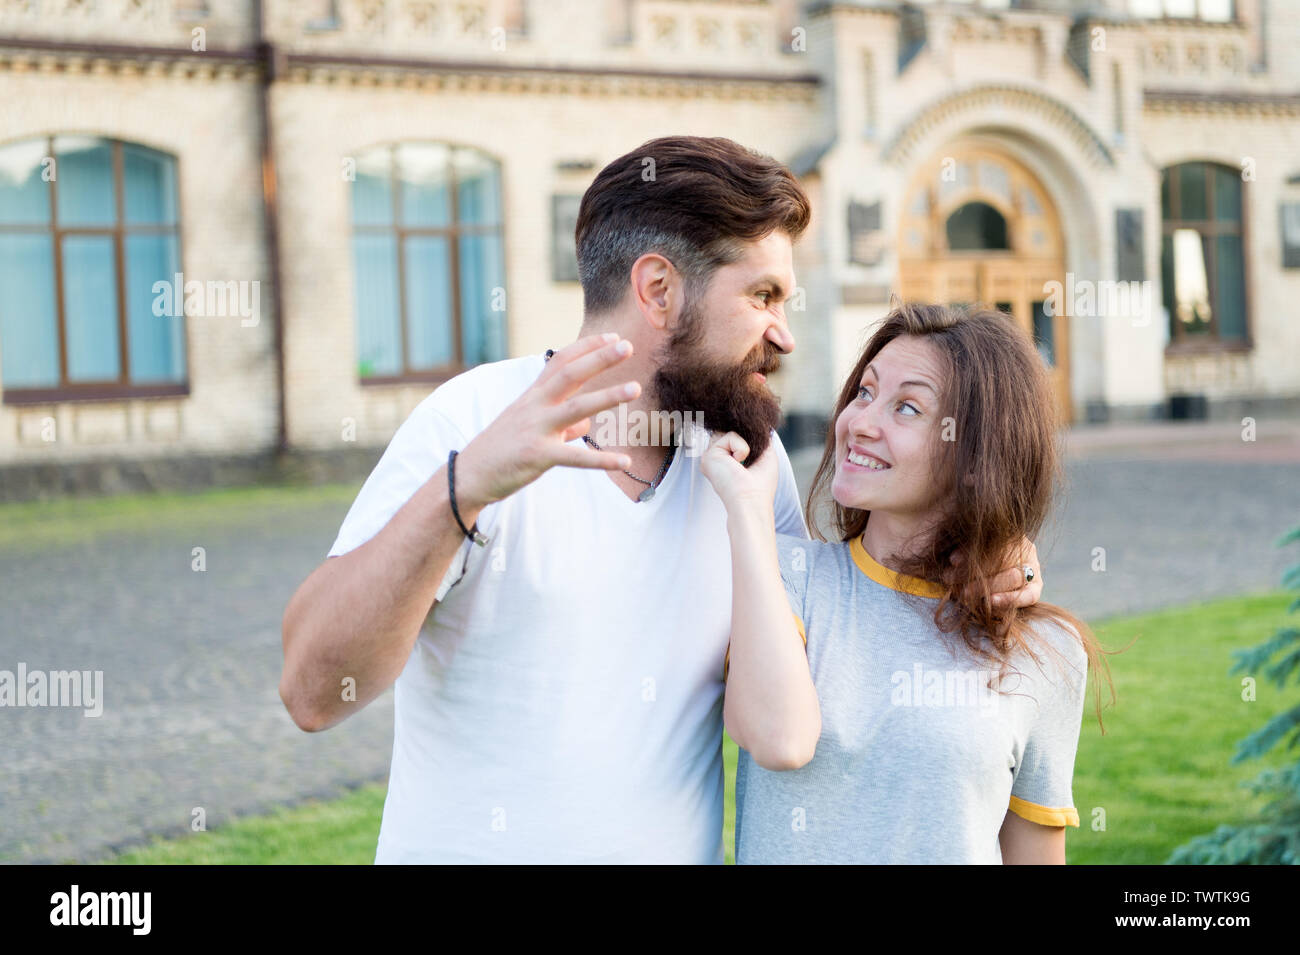 Violence and aggression. Family rules. Couple suffer violence against woman. Angry hipster and pretty woman . Relations problem. Family crisis concept. Stop violence social movement. Self defense. Stock Photo